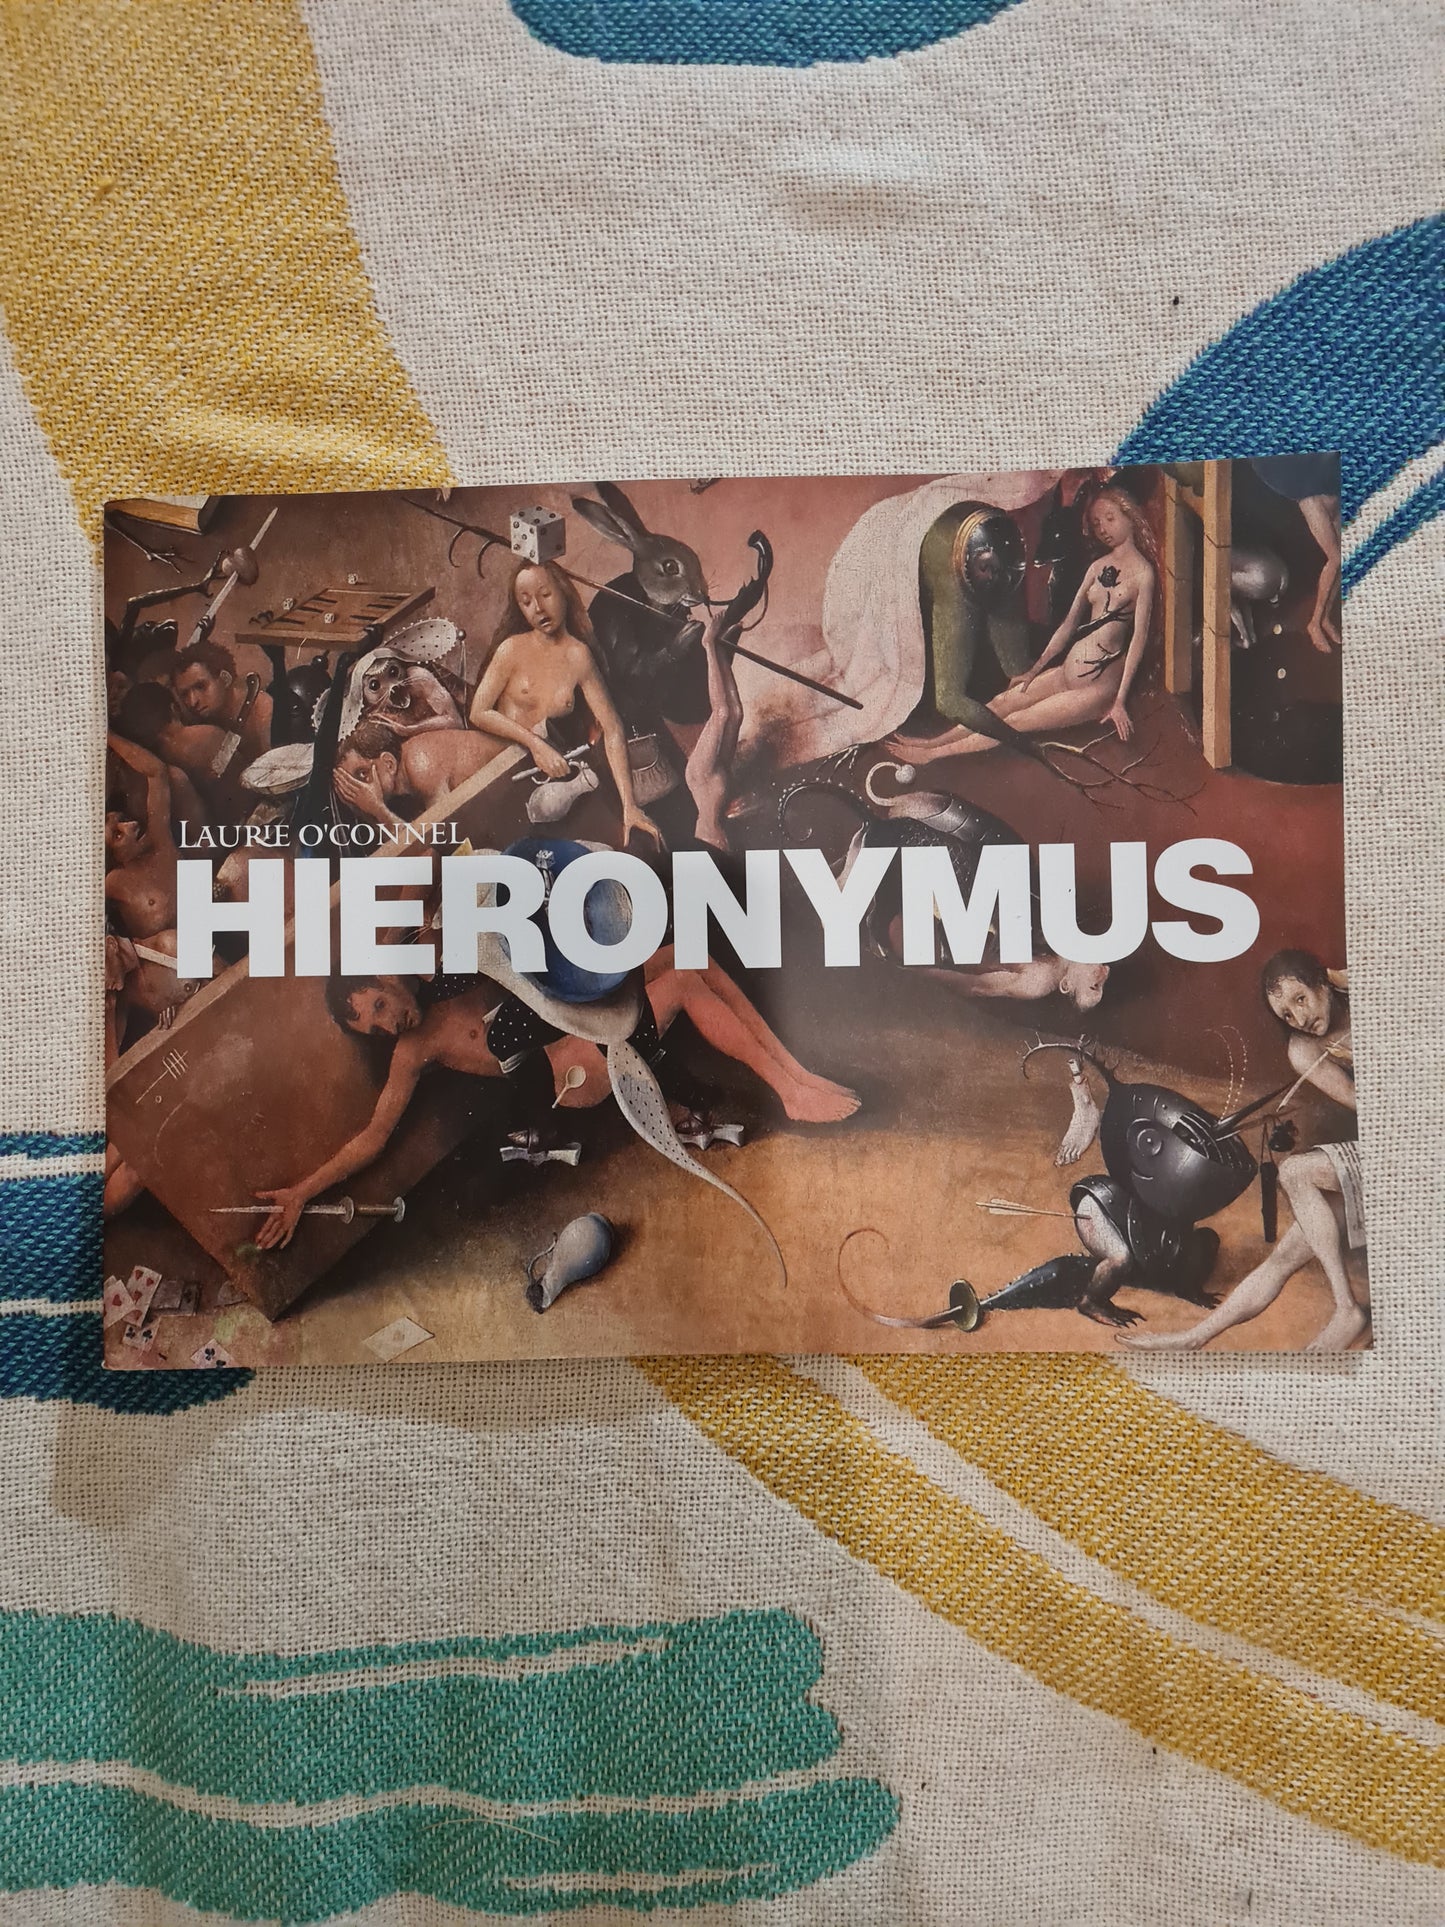 Hieronymus: Garden of Earthly Delights Edition